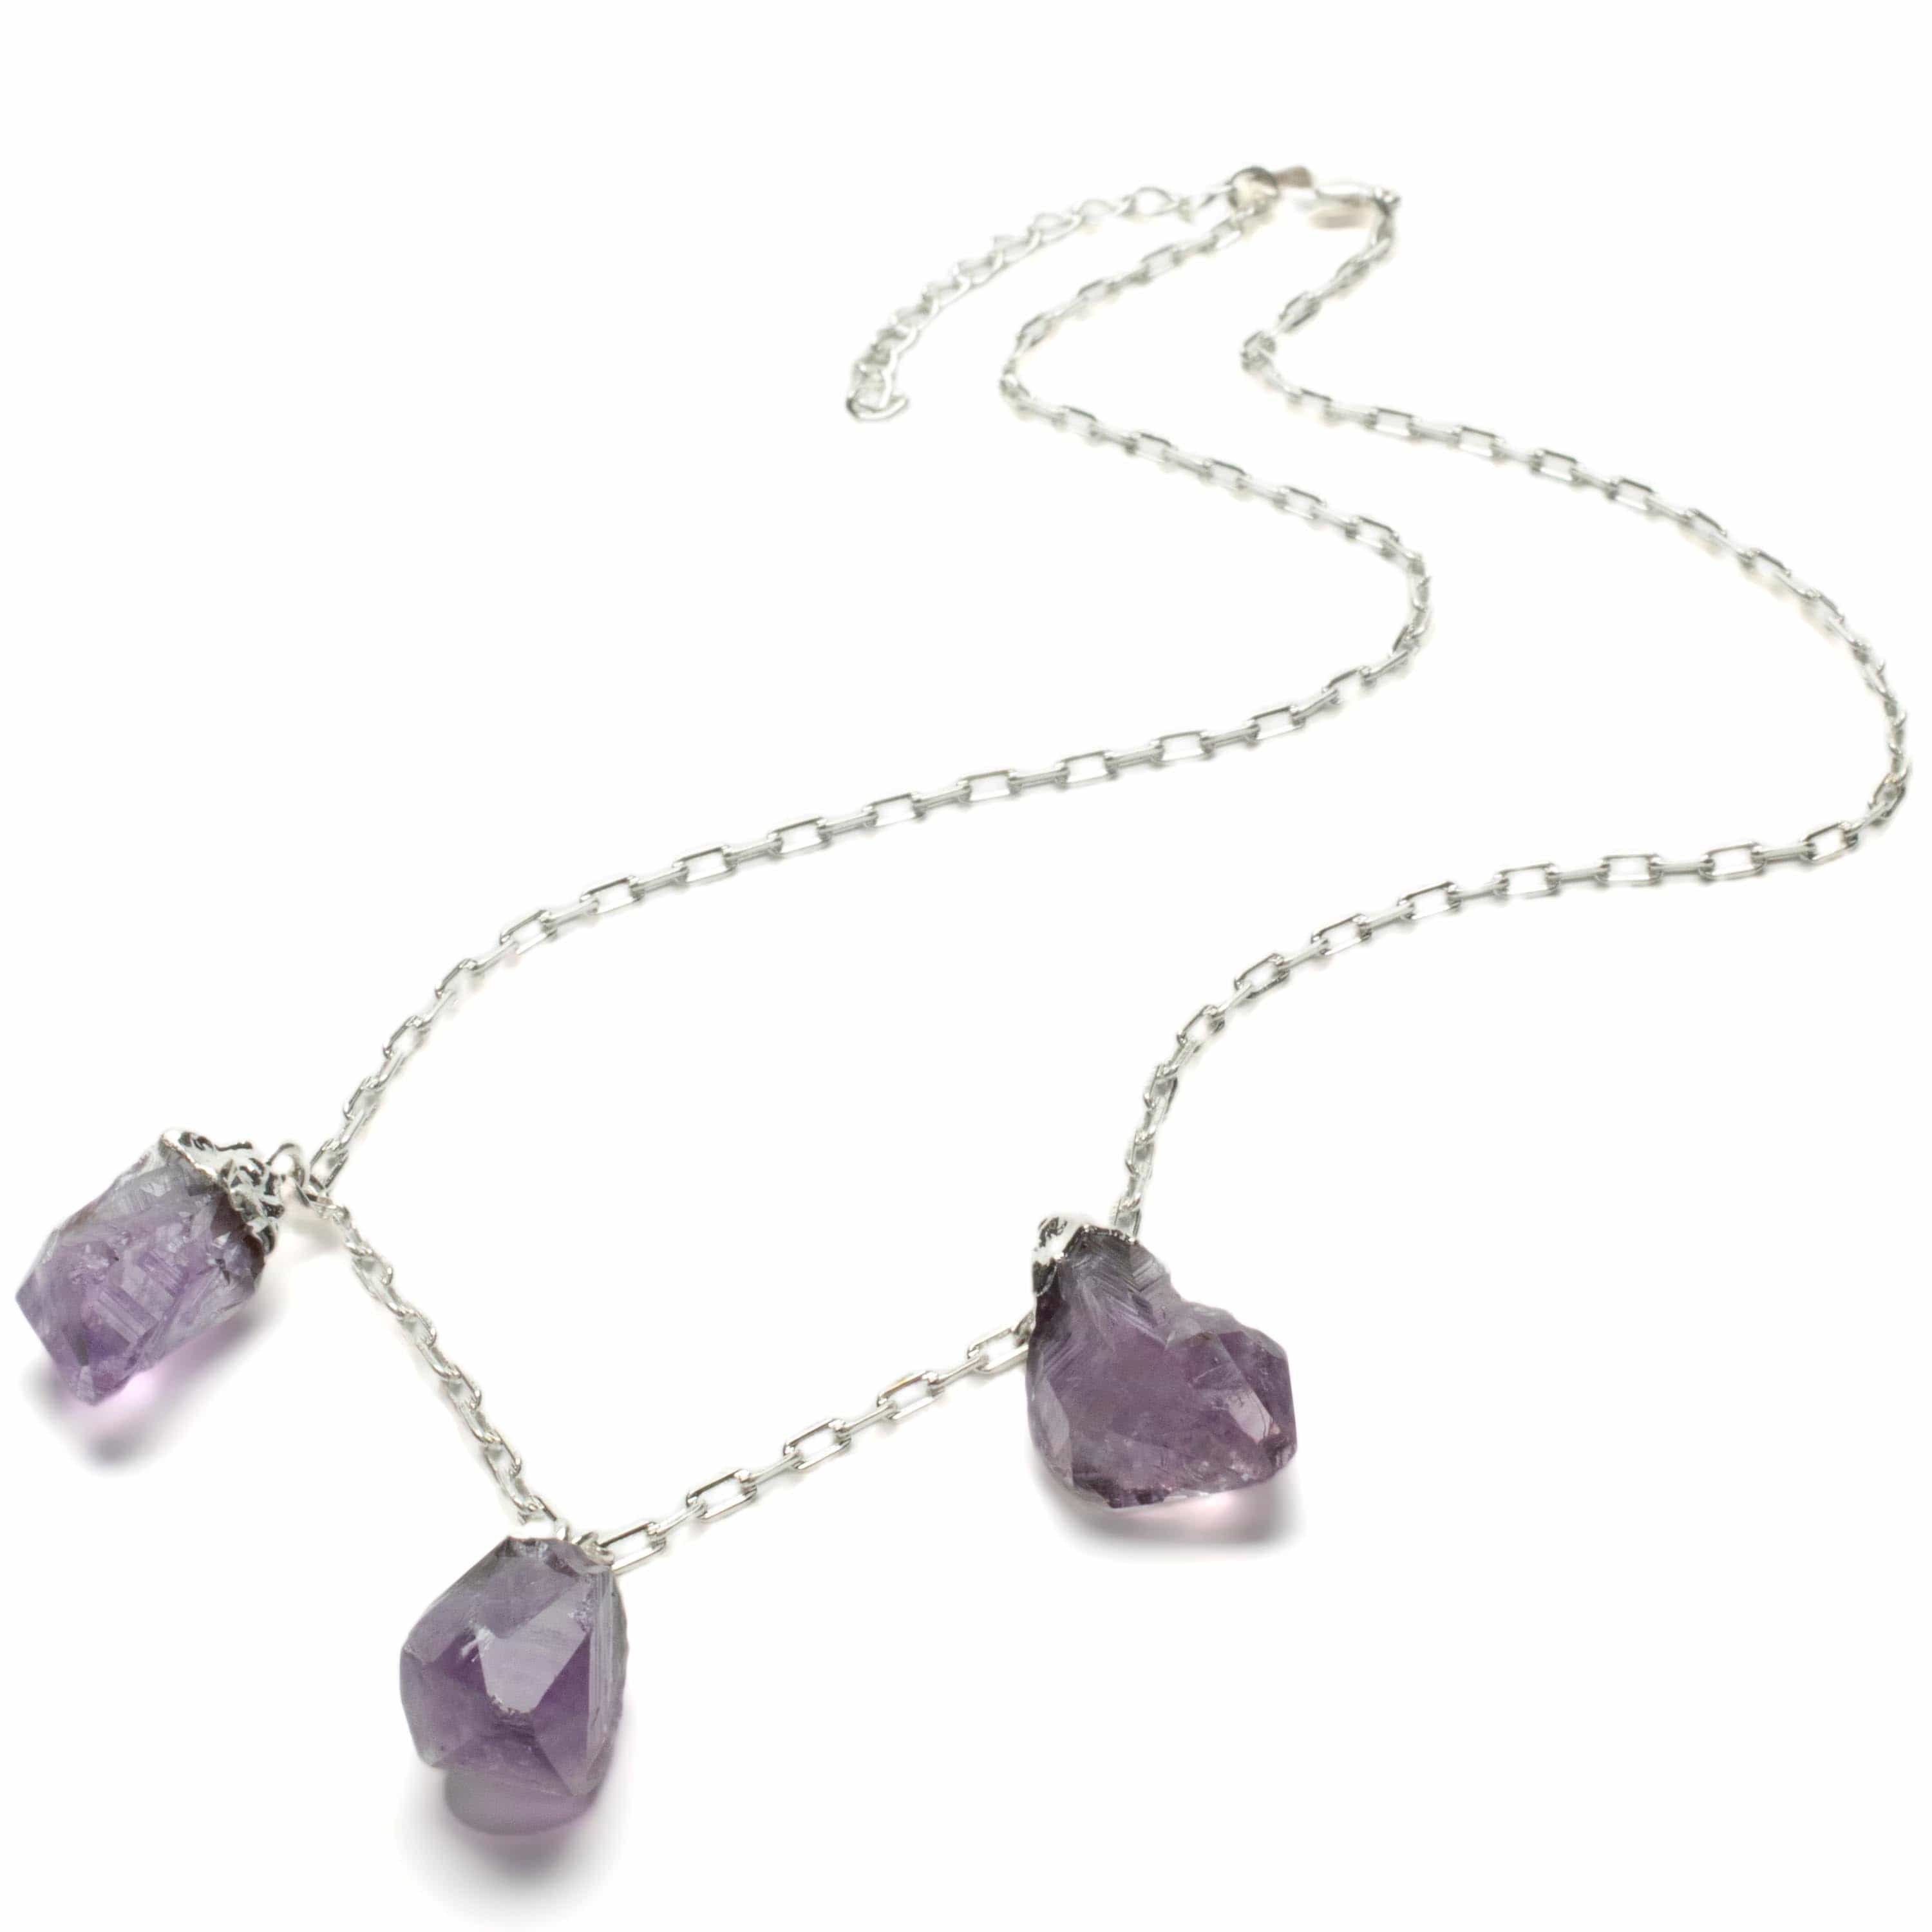 Kalifano Crystal Jewelry Amethyst Triple Point Necklace CJN-2042-AM